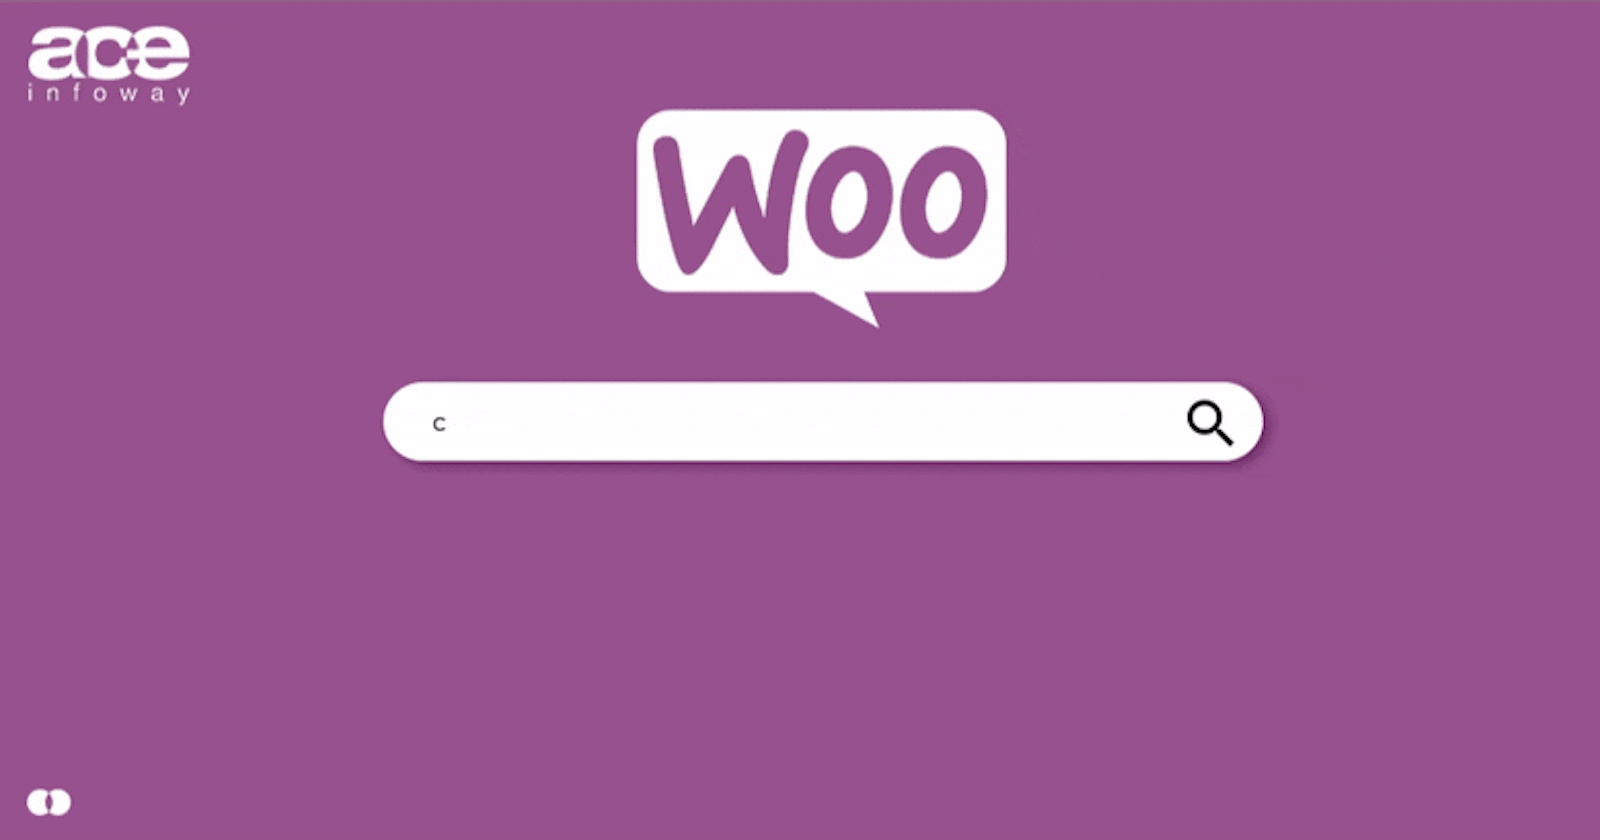 How the hell can I optimize the WooCommerce store for better SEO?